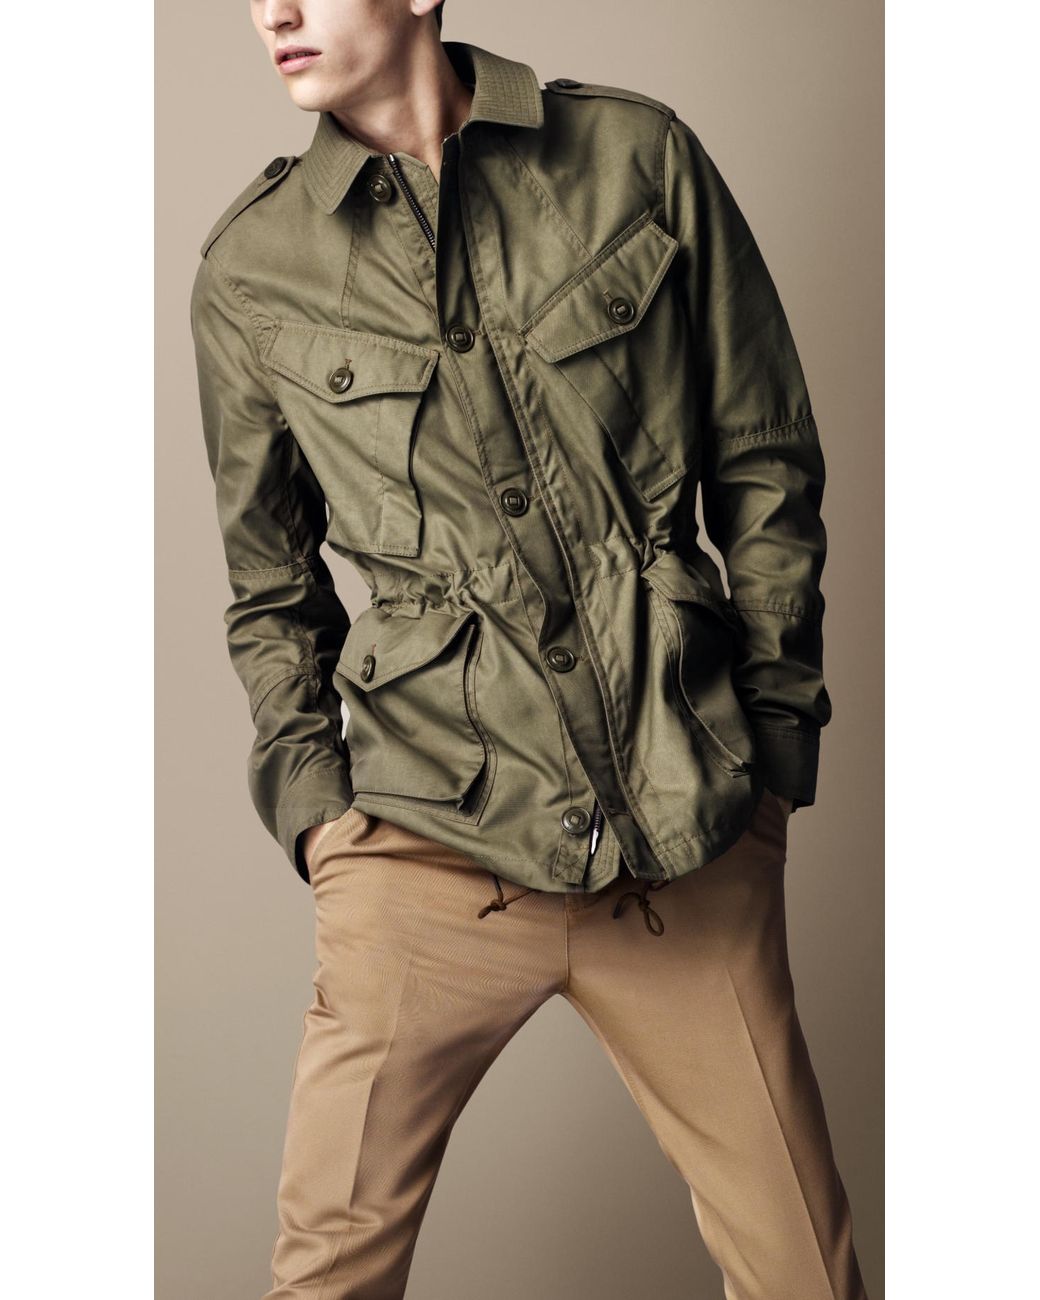 Burberry Brit Heritage Military Field Jacket in Grey for Men | Lyst UK